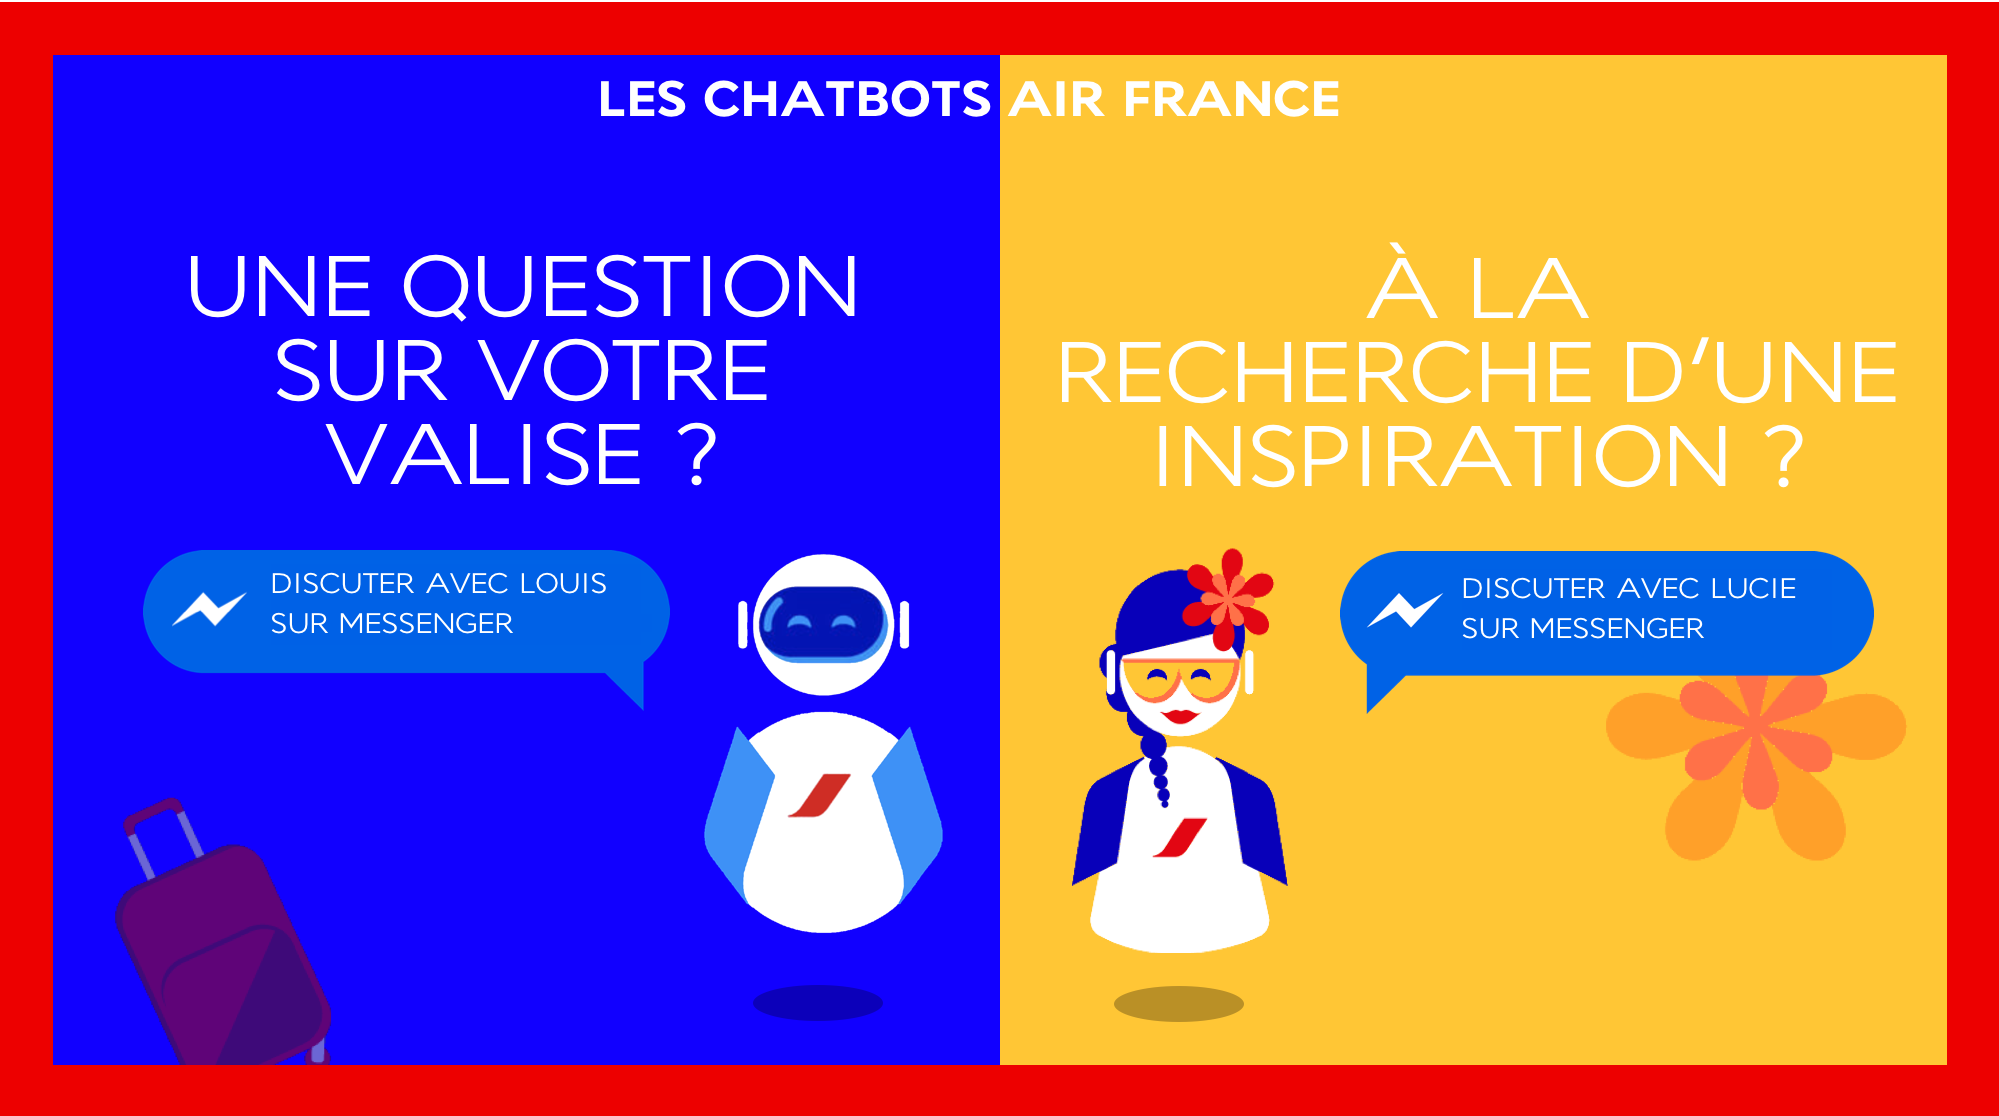 example of the air france chatbot